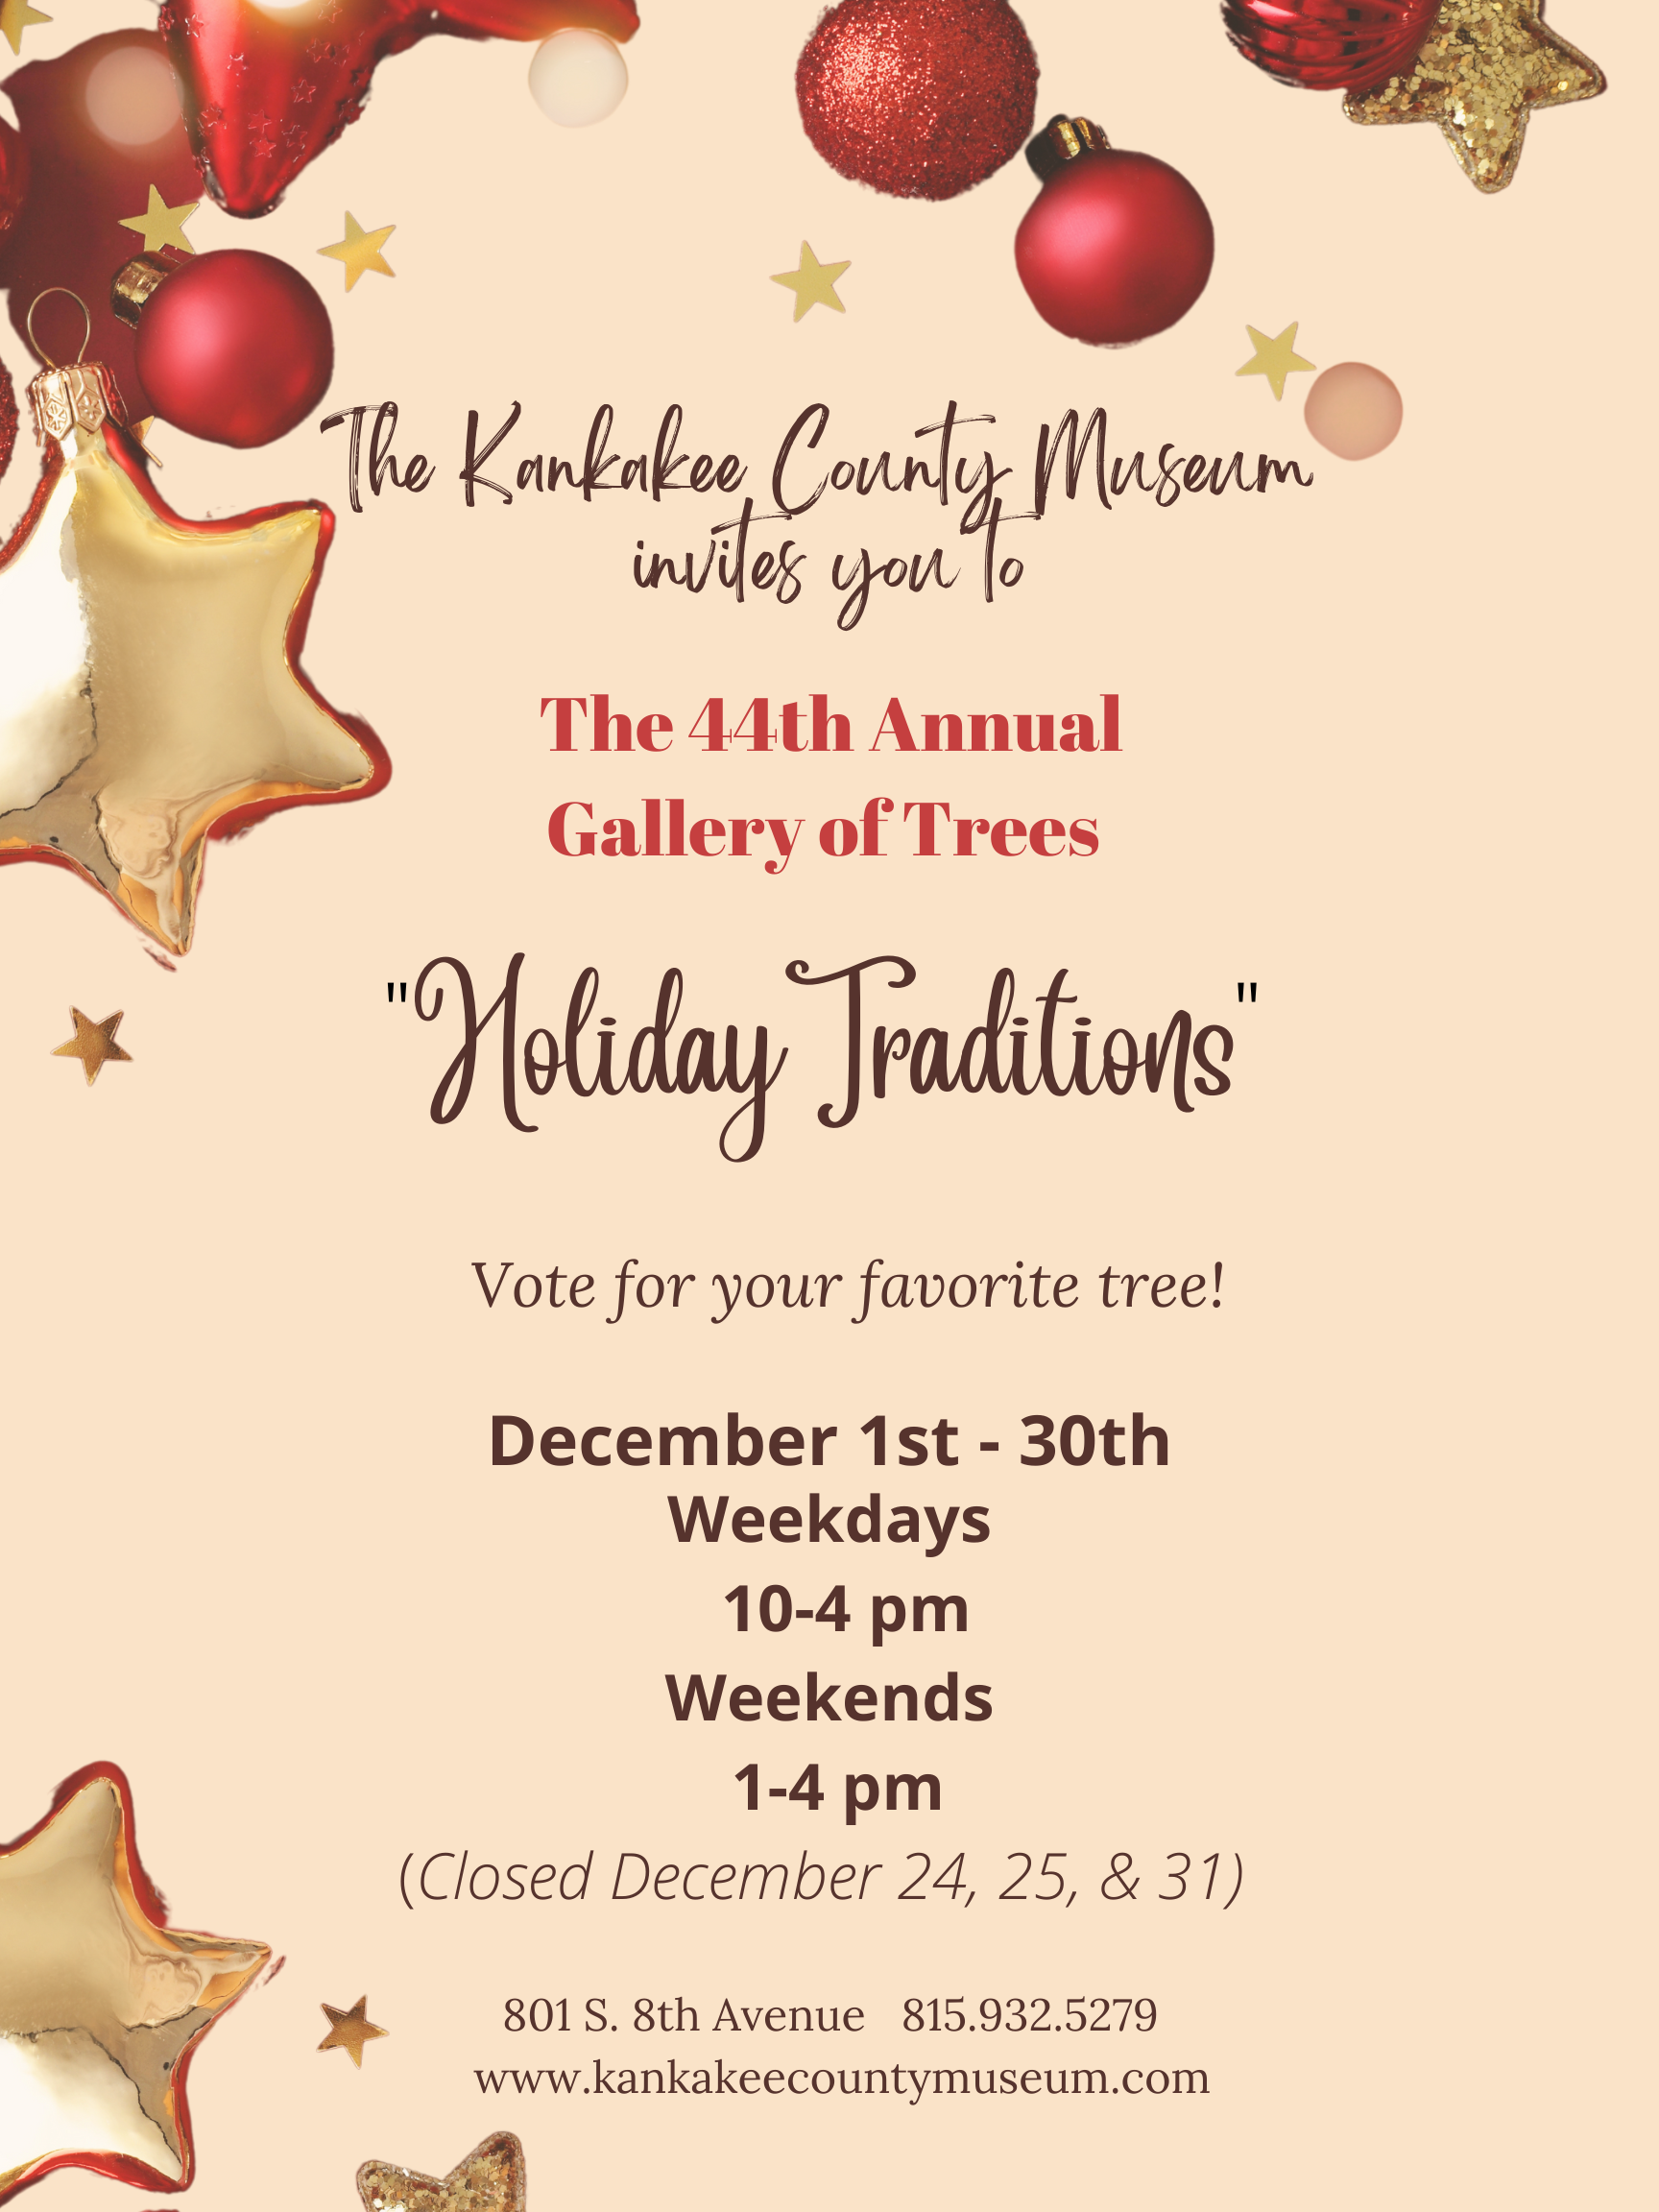 The 44th Annual Gallery of Trees